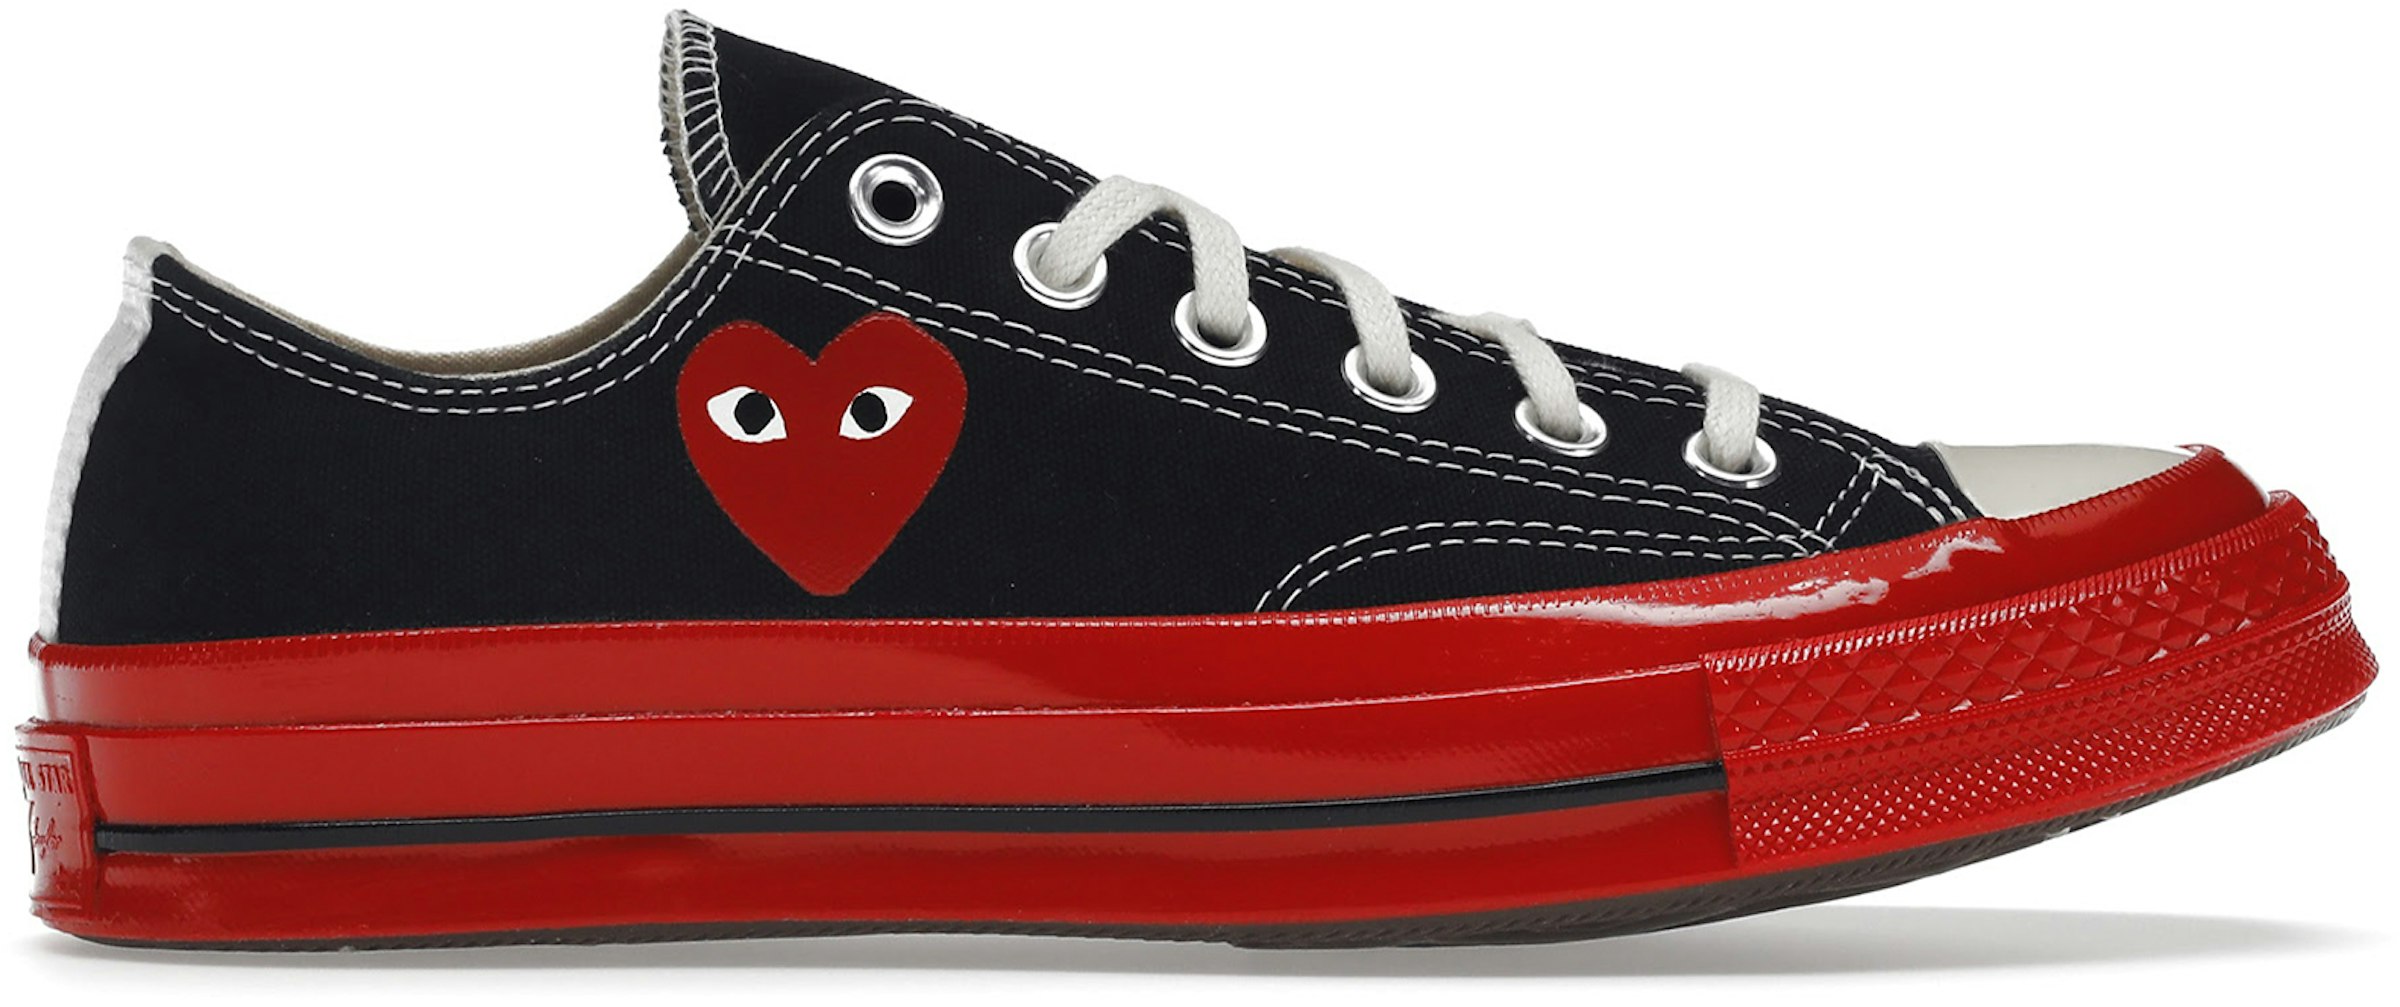 Converse Chuck Taylor All-Star 70 Ox Comme des Garcons Black Red Midsole A01795C - US